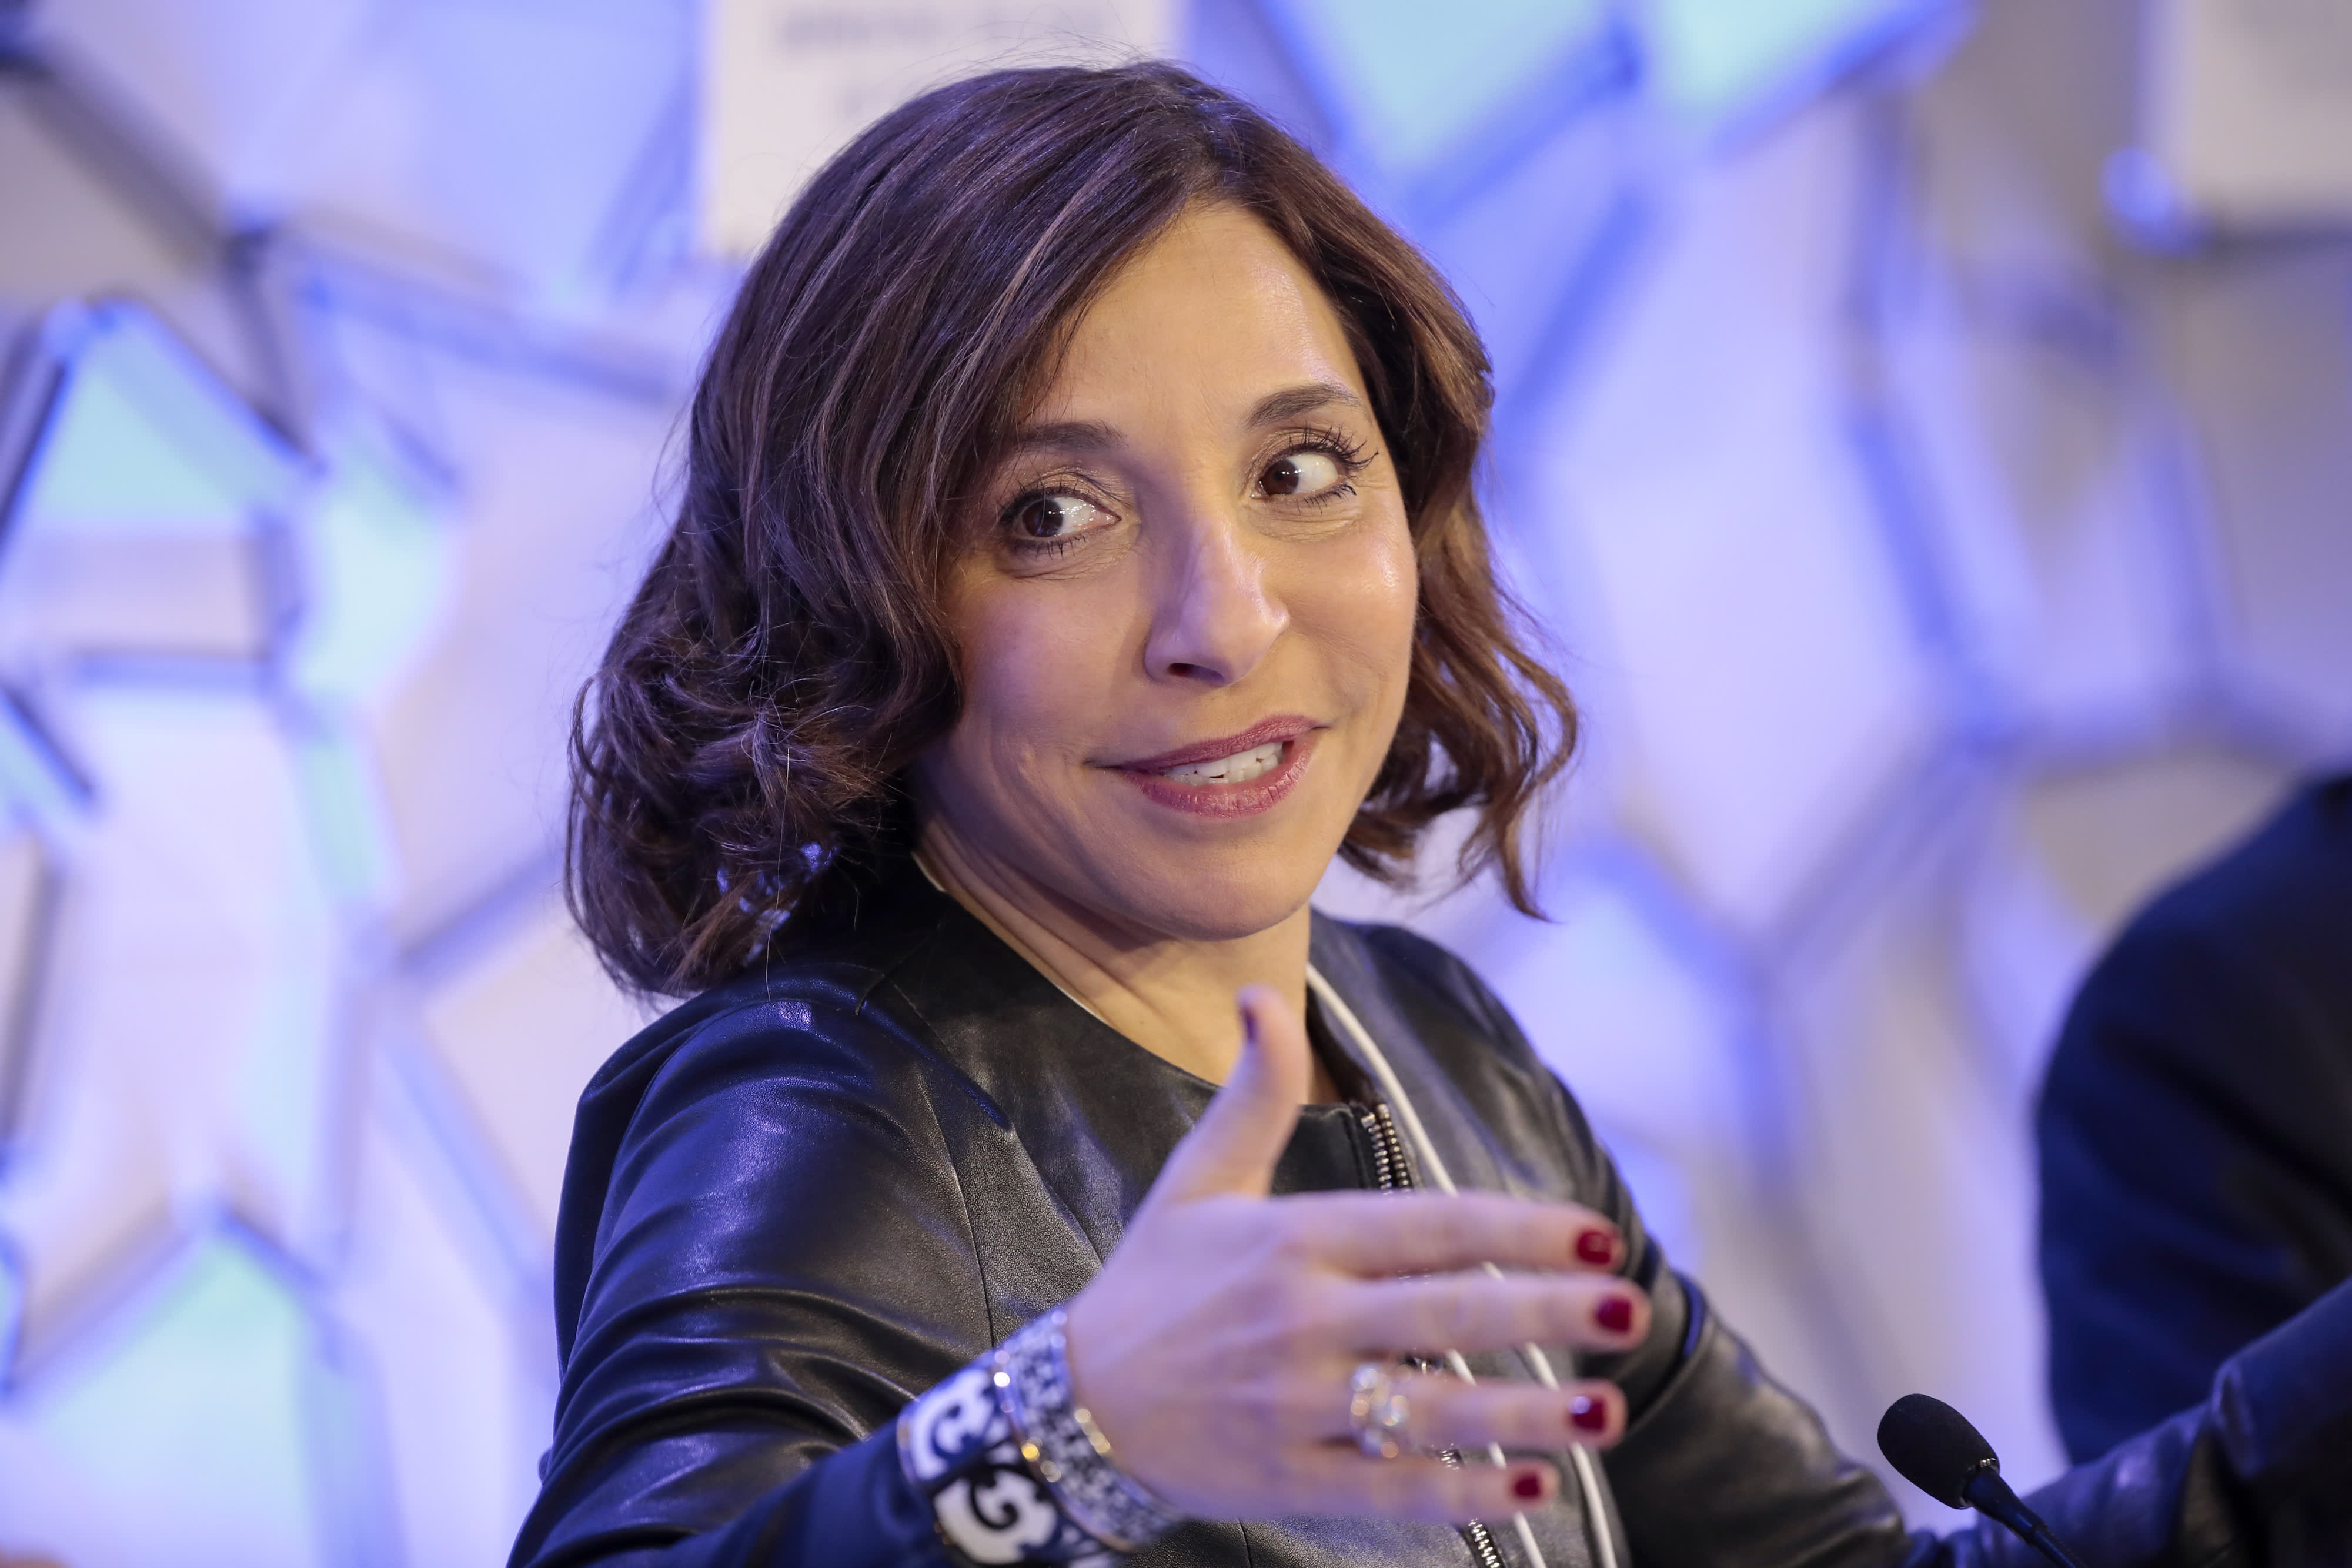 NBCUniversal’s advertising chief Yaccarino is resigning amid CEO rhetoric on Twitter